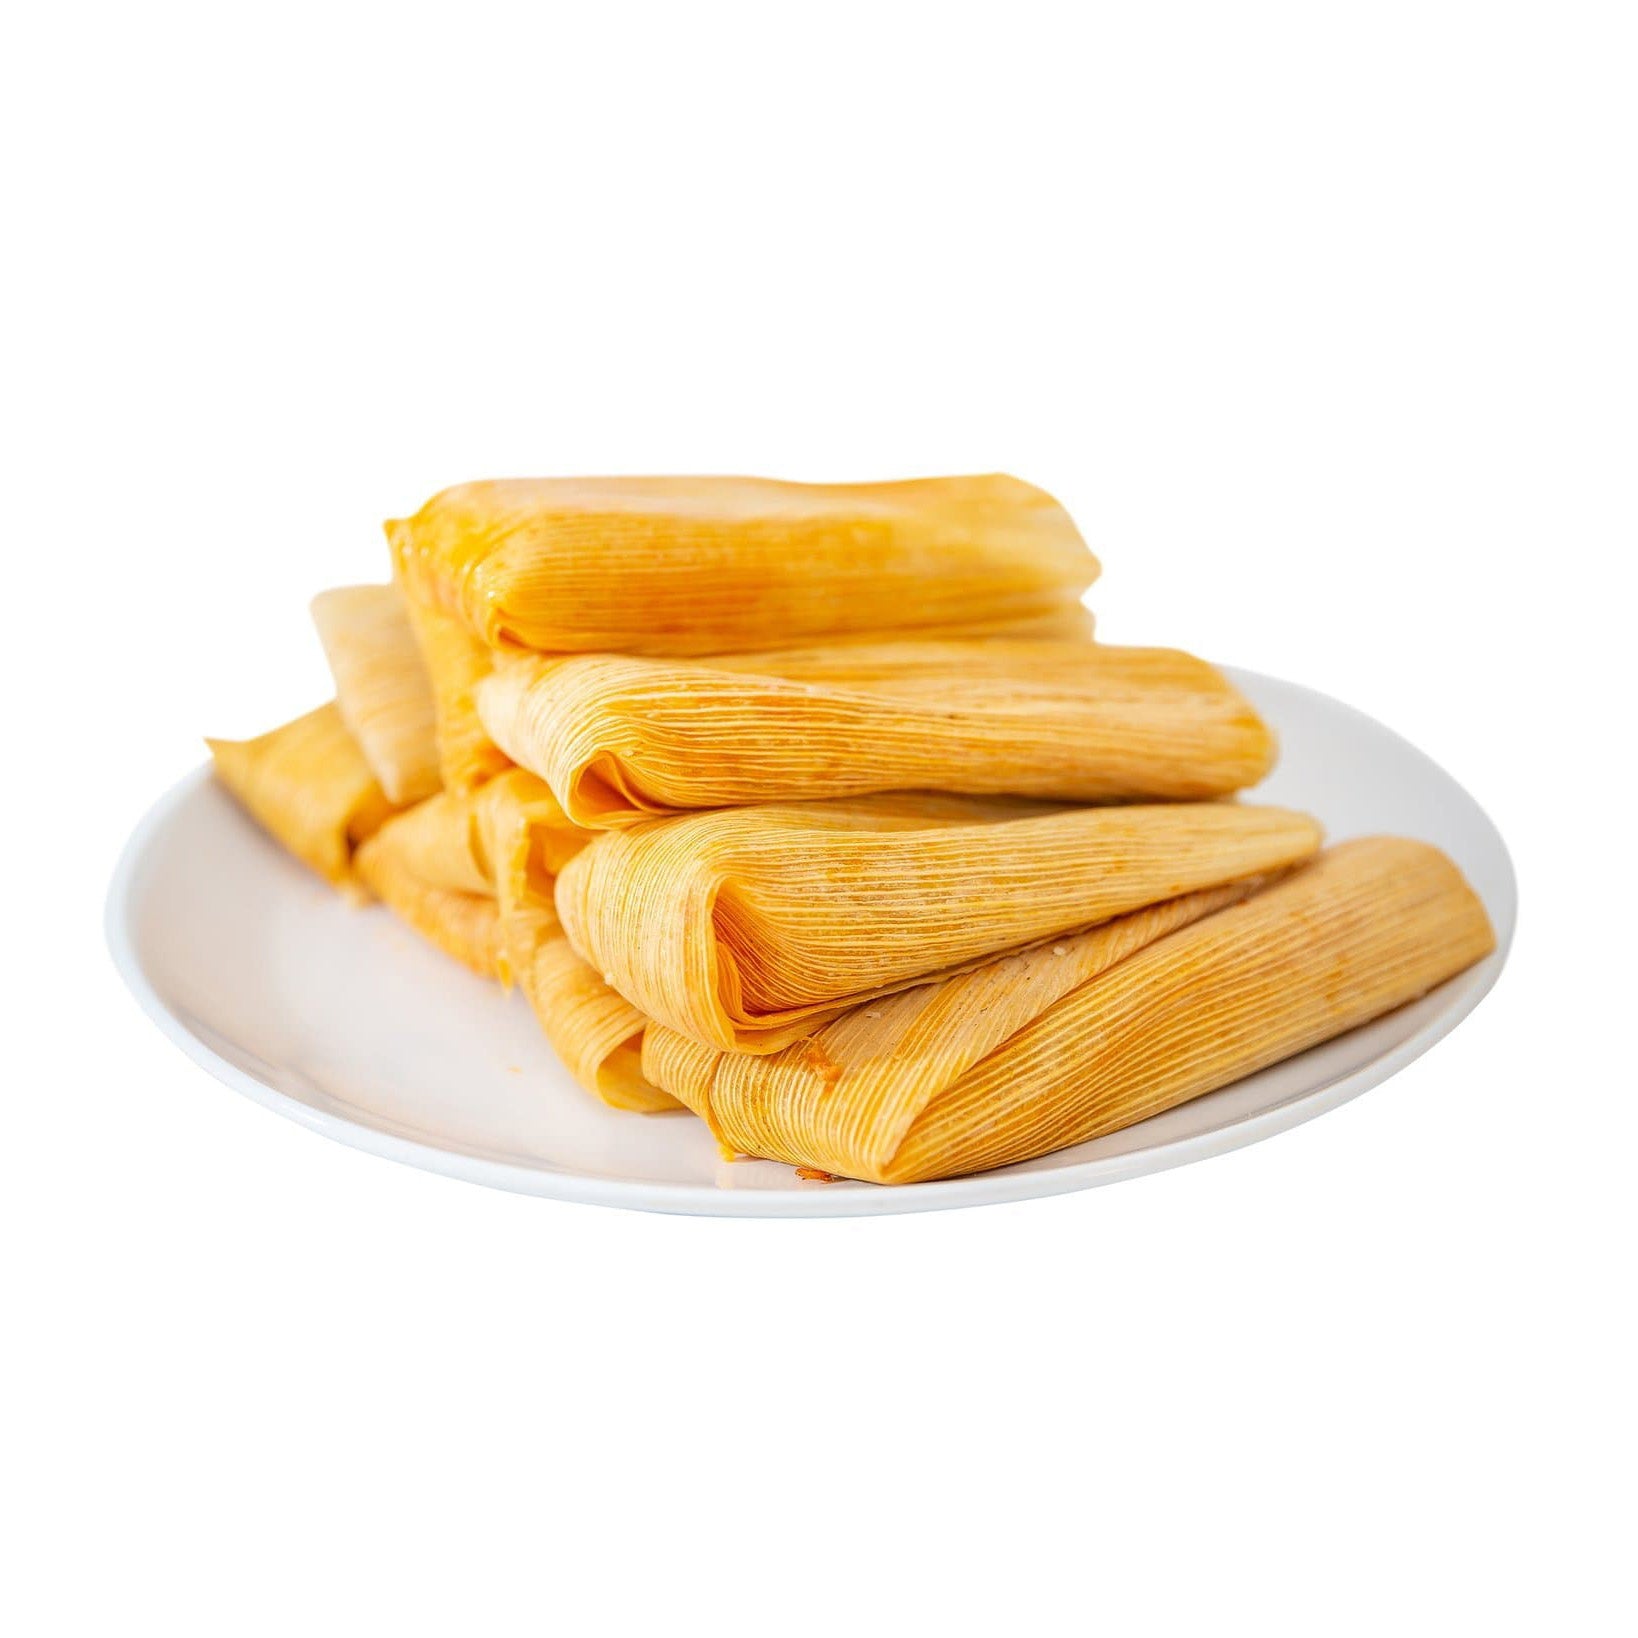 A stack of freshly made Pork Carnitas Tamales wrapped in corn husks, arranged neatly on a white plate, with a clean white background.